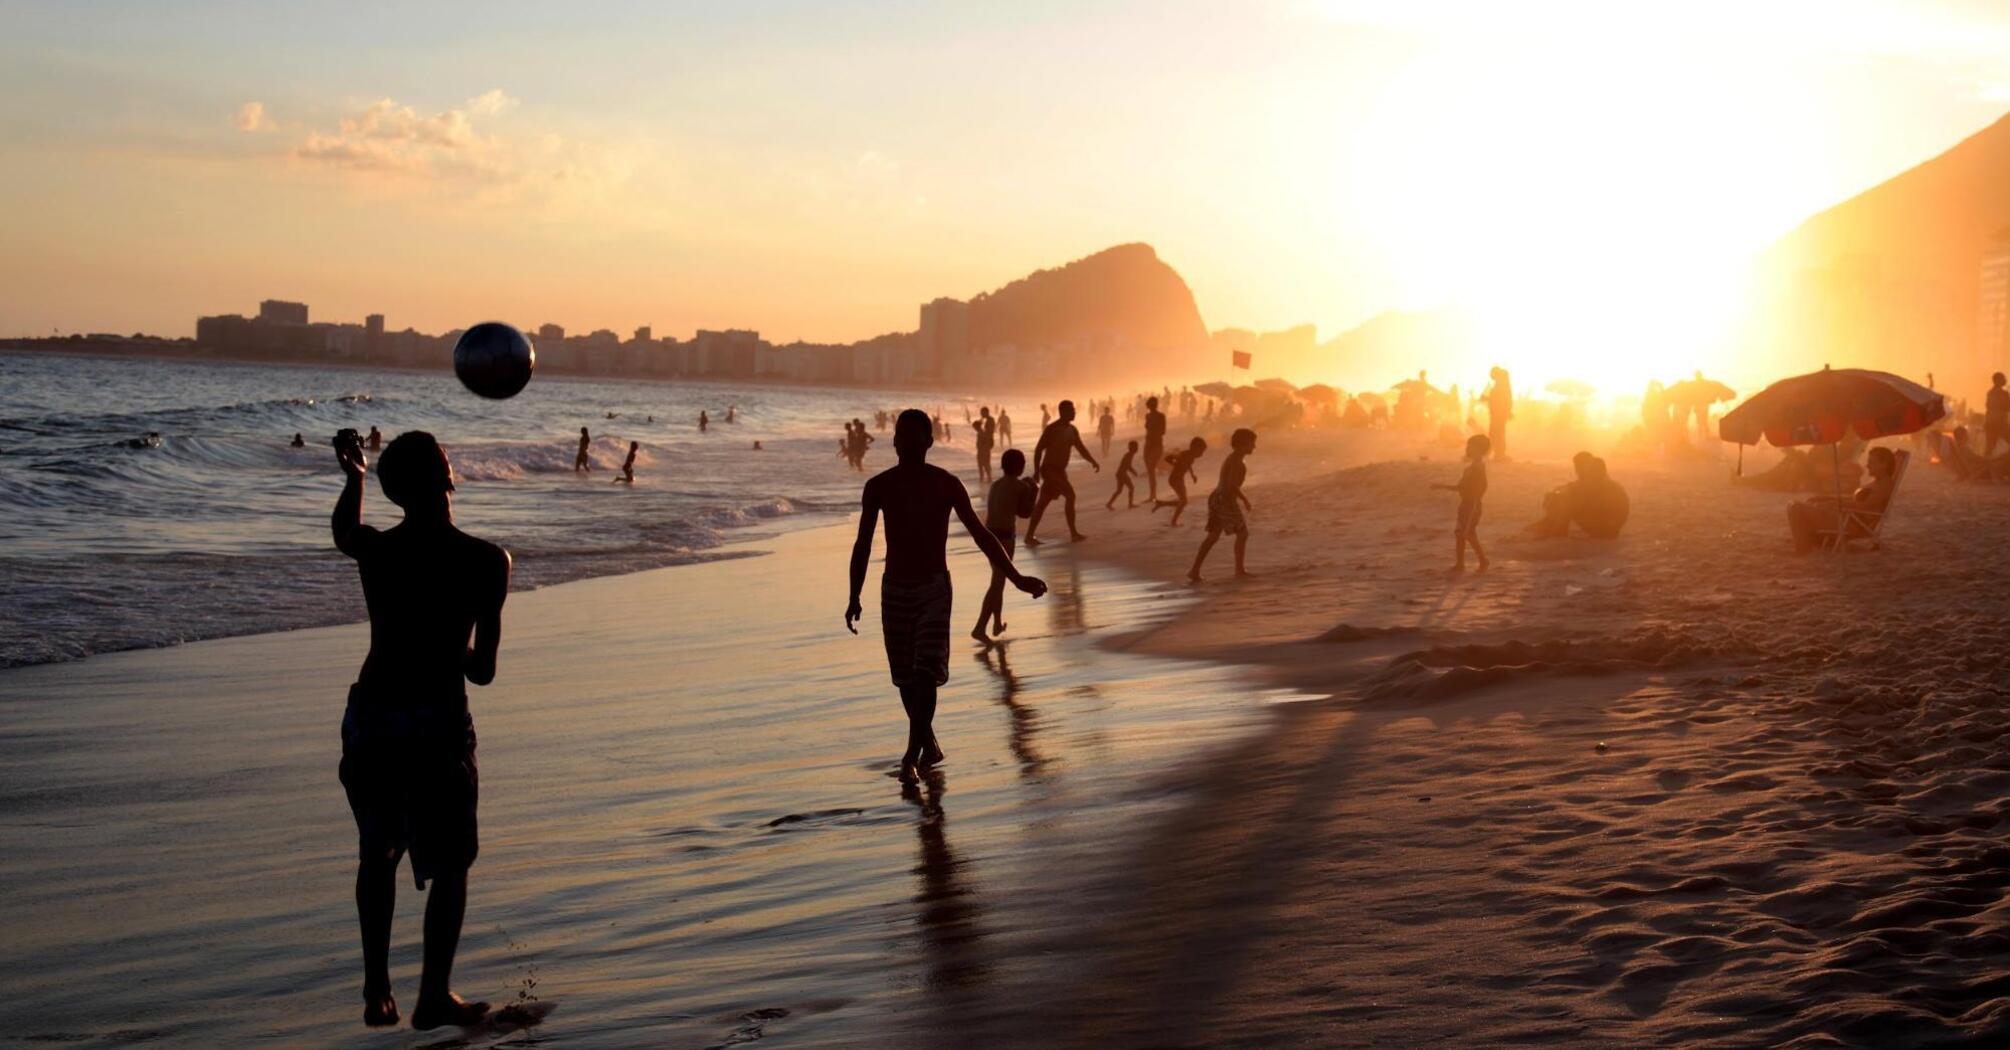 People playing beach soccer at sunset